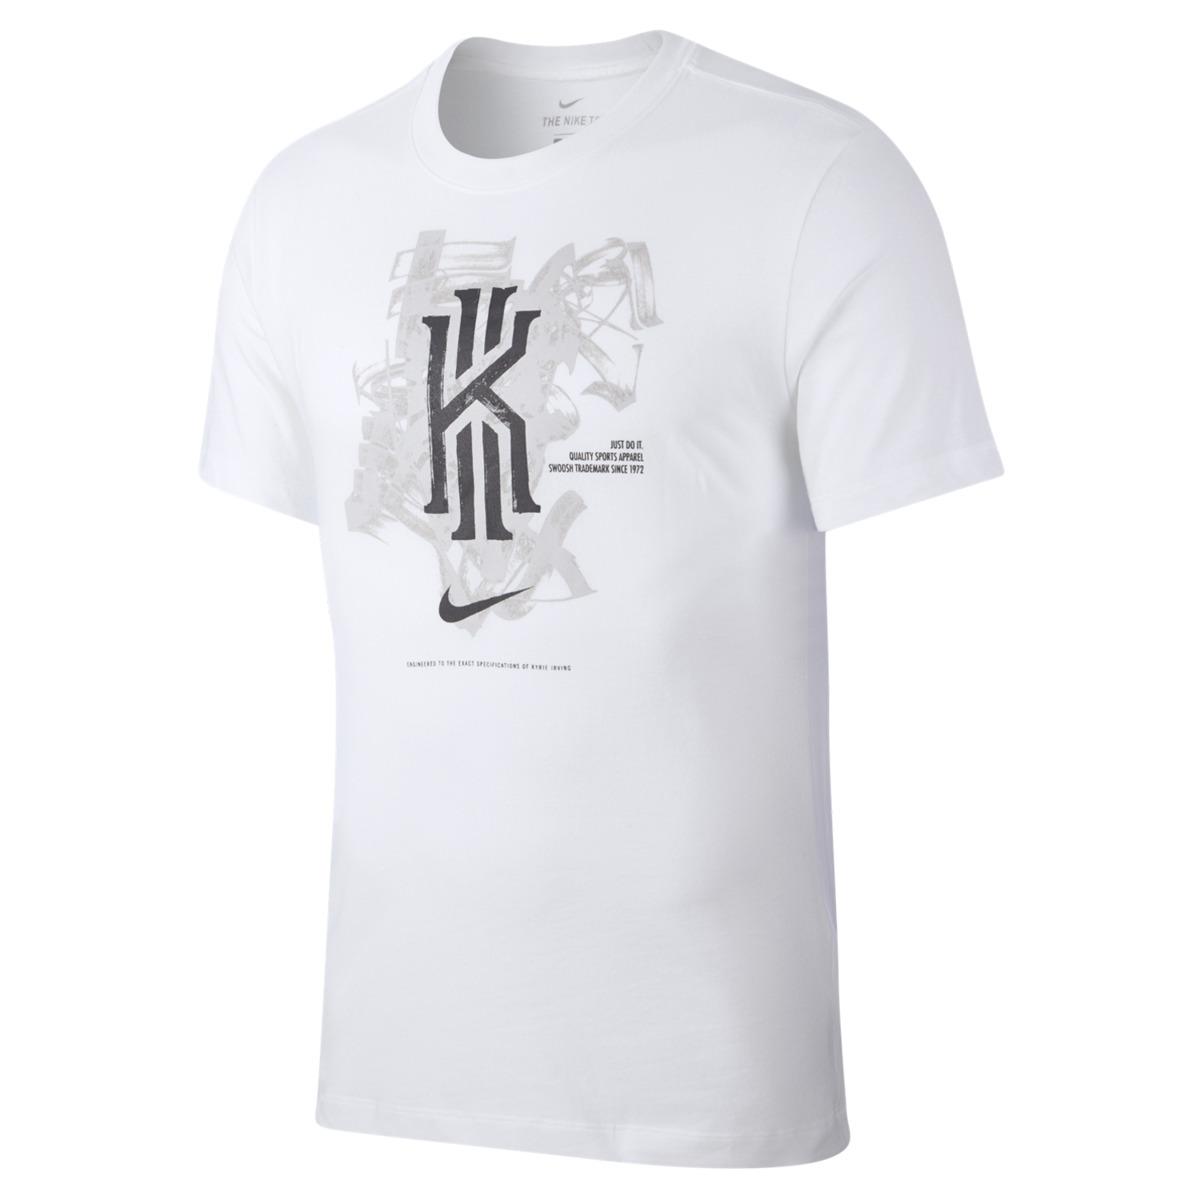 Nike Cotton Dri-fit Kyrie T-shirt in White for Men - Lyst